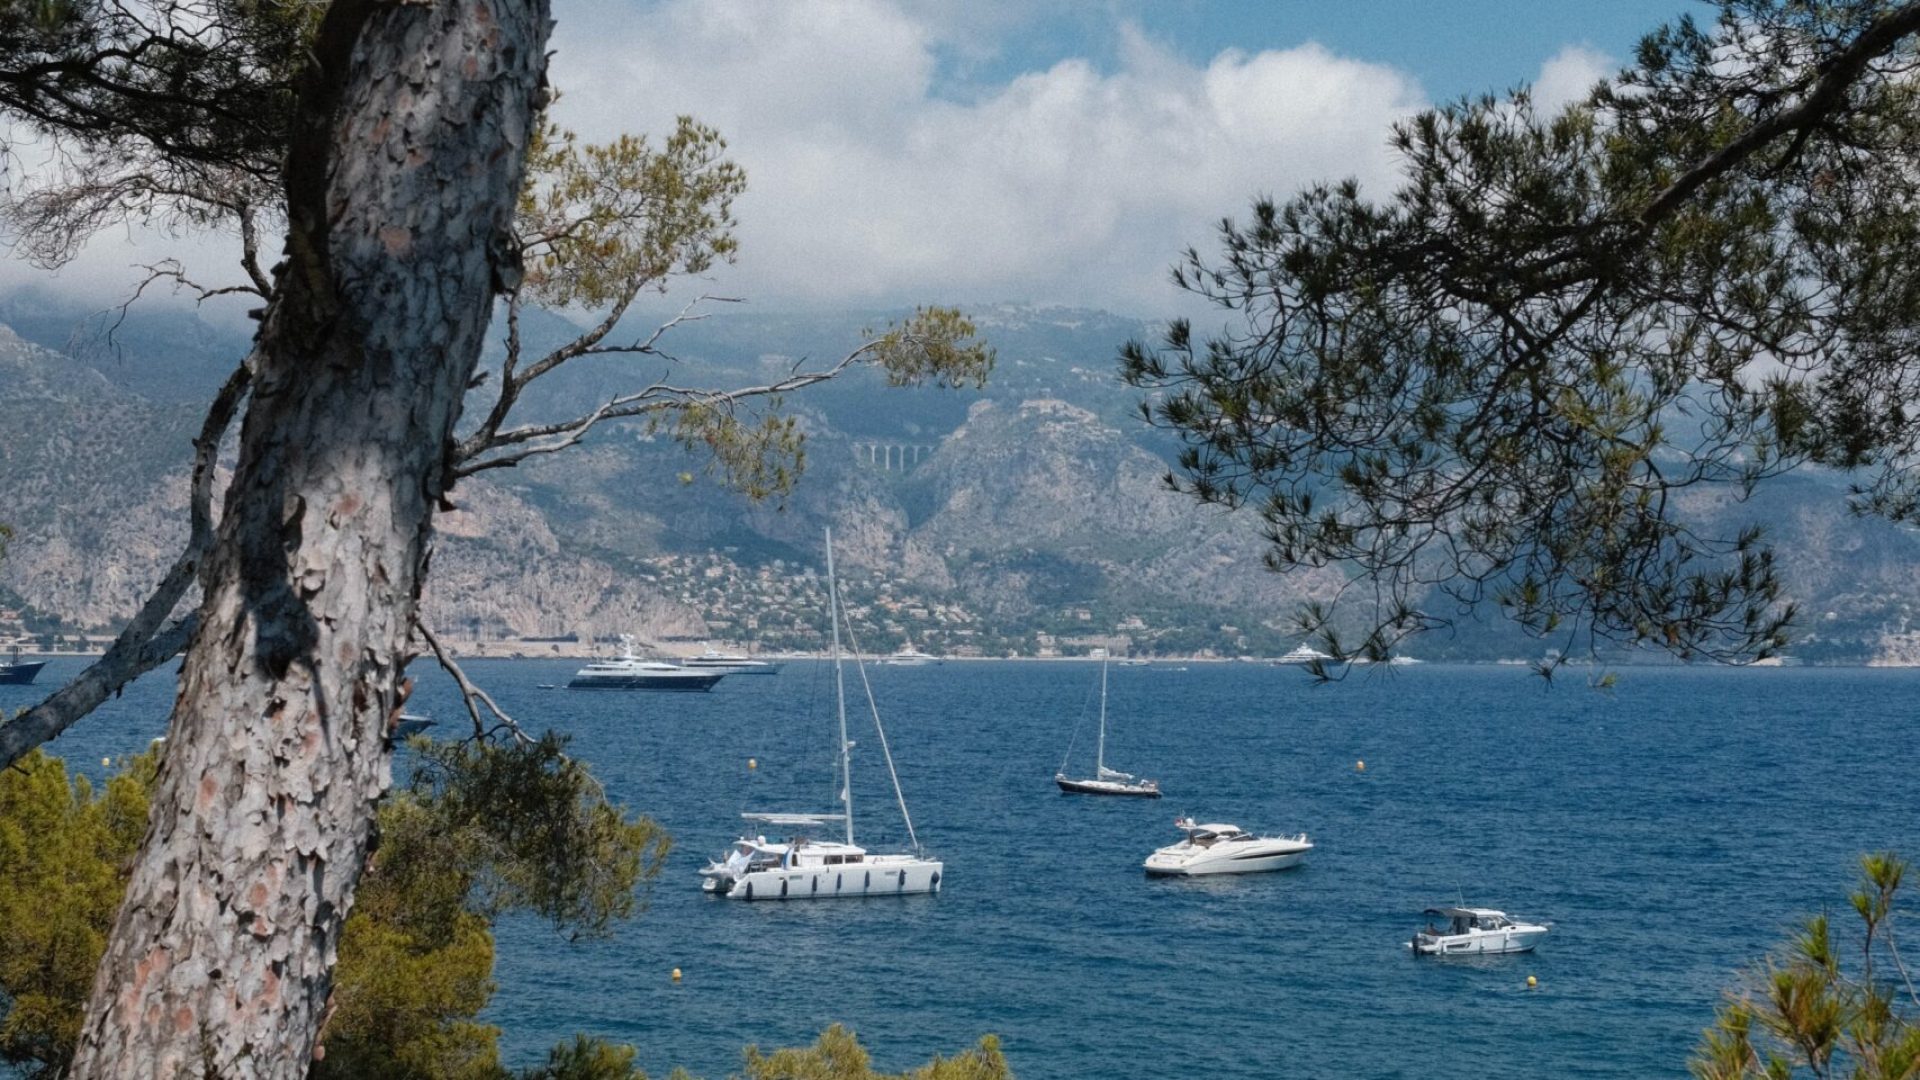 [sailboats on blue sea with pine trees framing them and mountains in background.] south of france